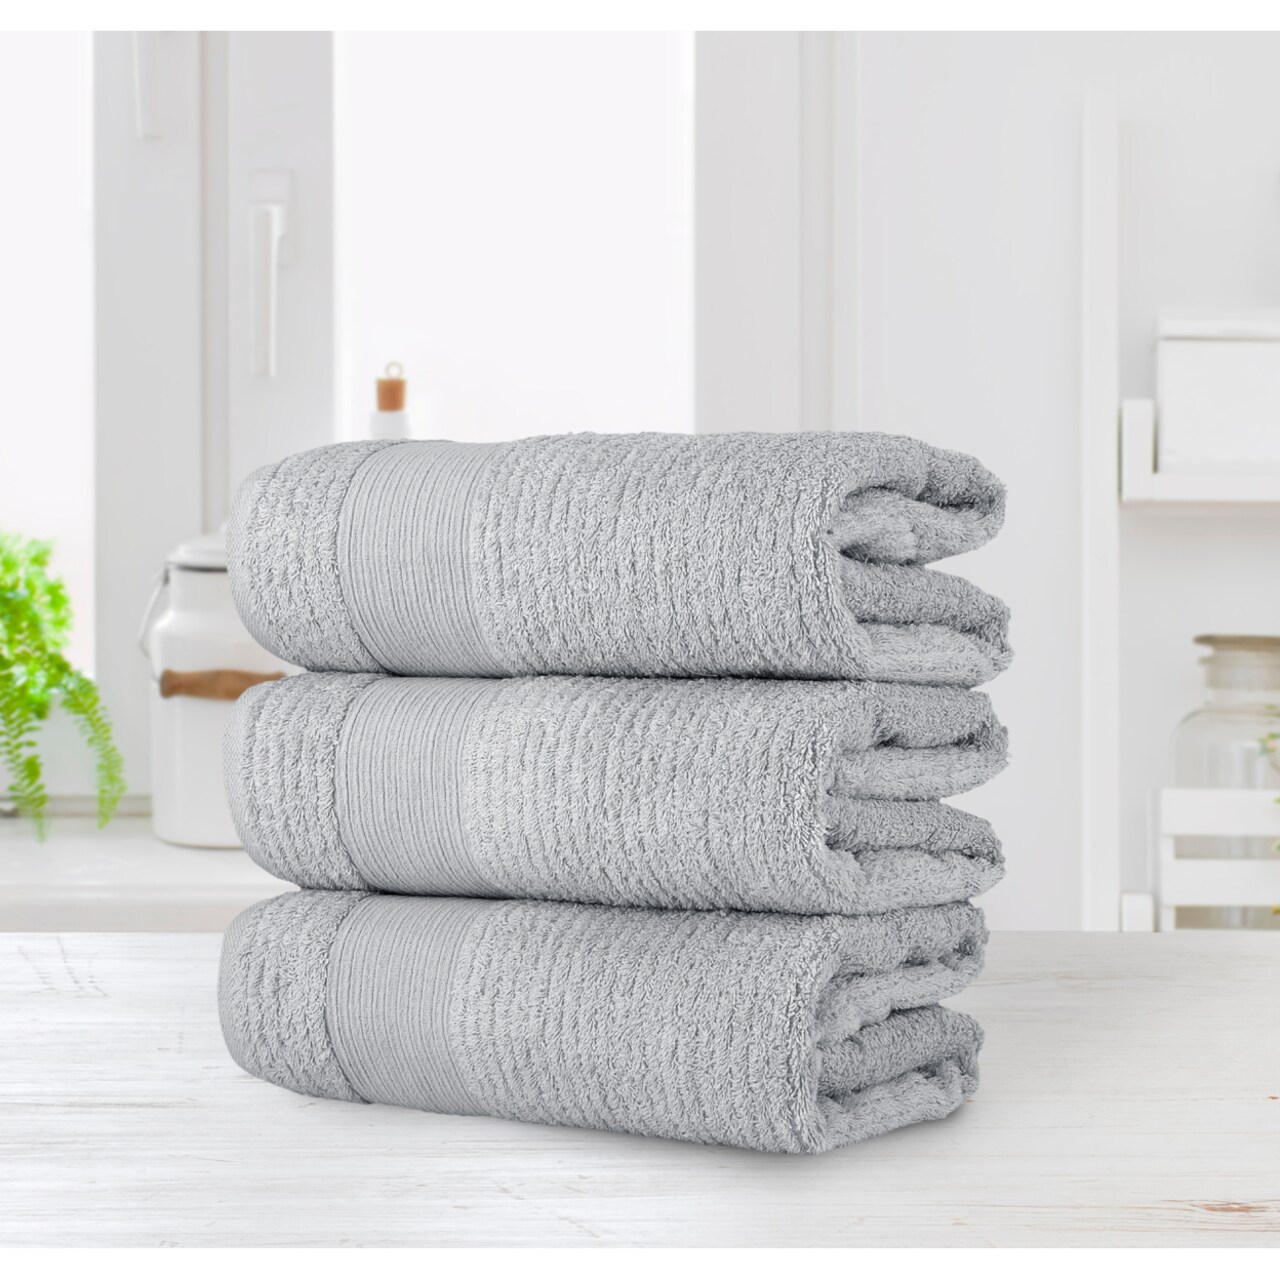 Organic Towel Collection for Pure Comfort